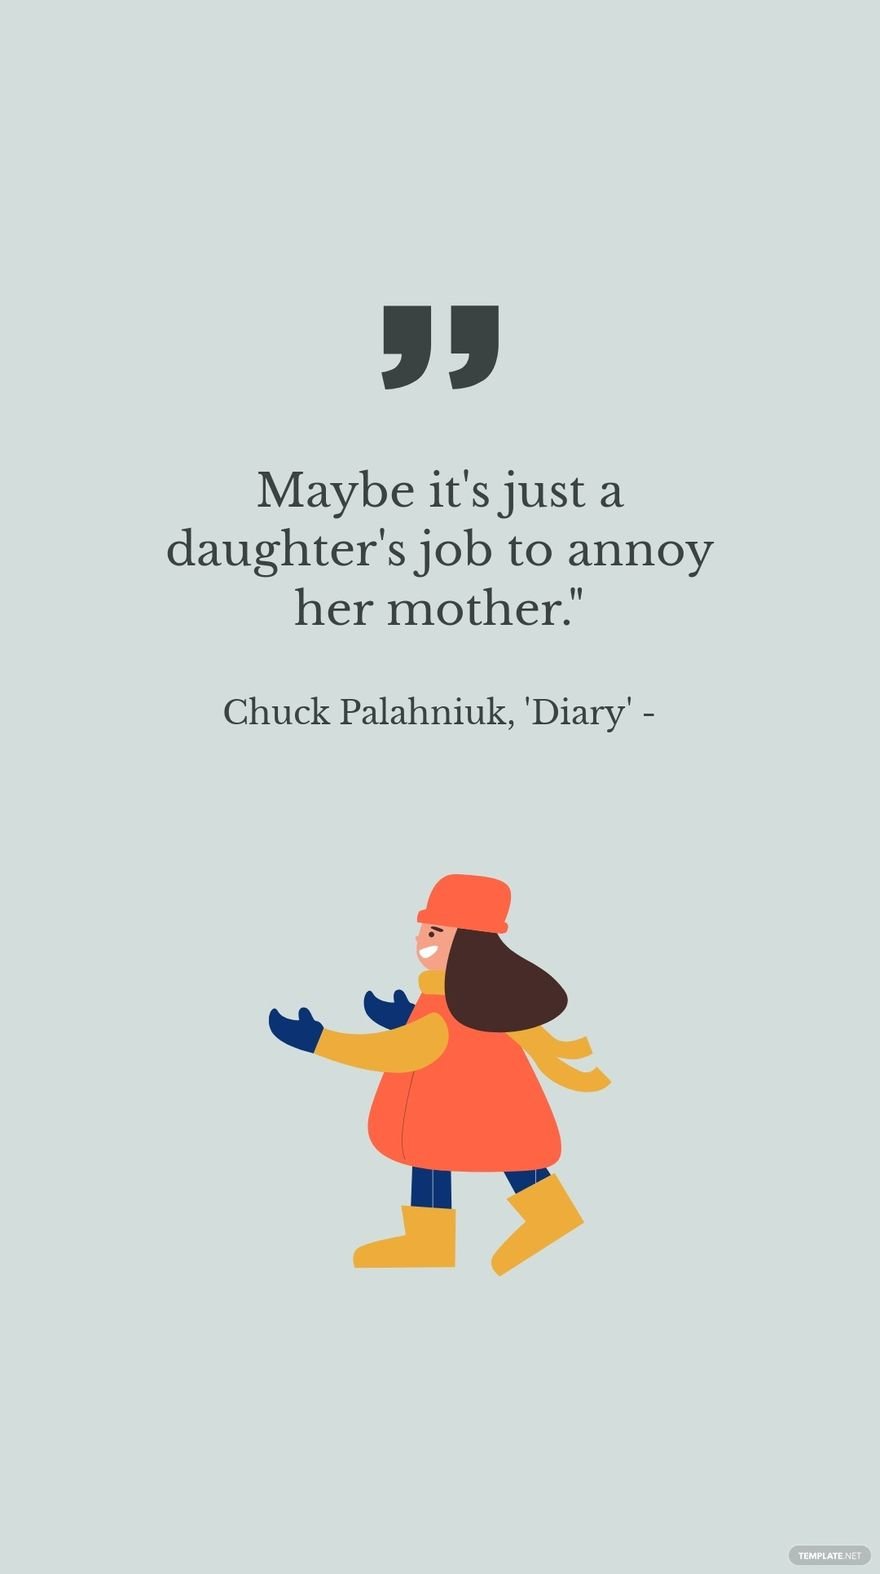 Chuck Palahniuk, 'Diary' - Maybe it's just a daughter's job to annoy her mother."